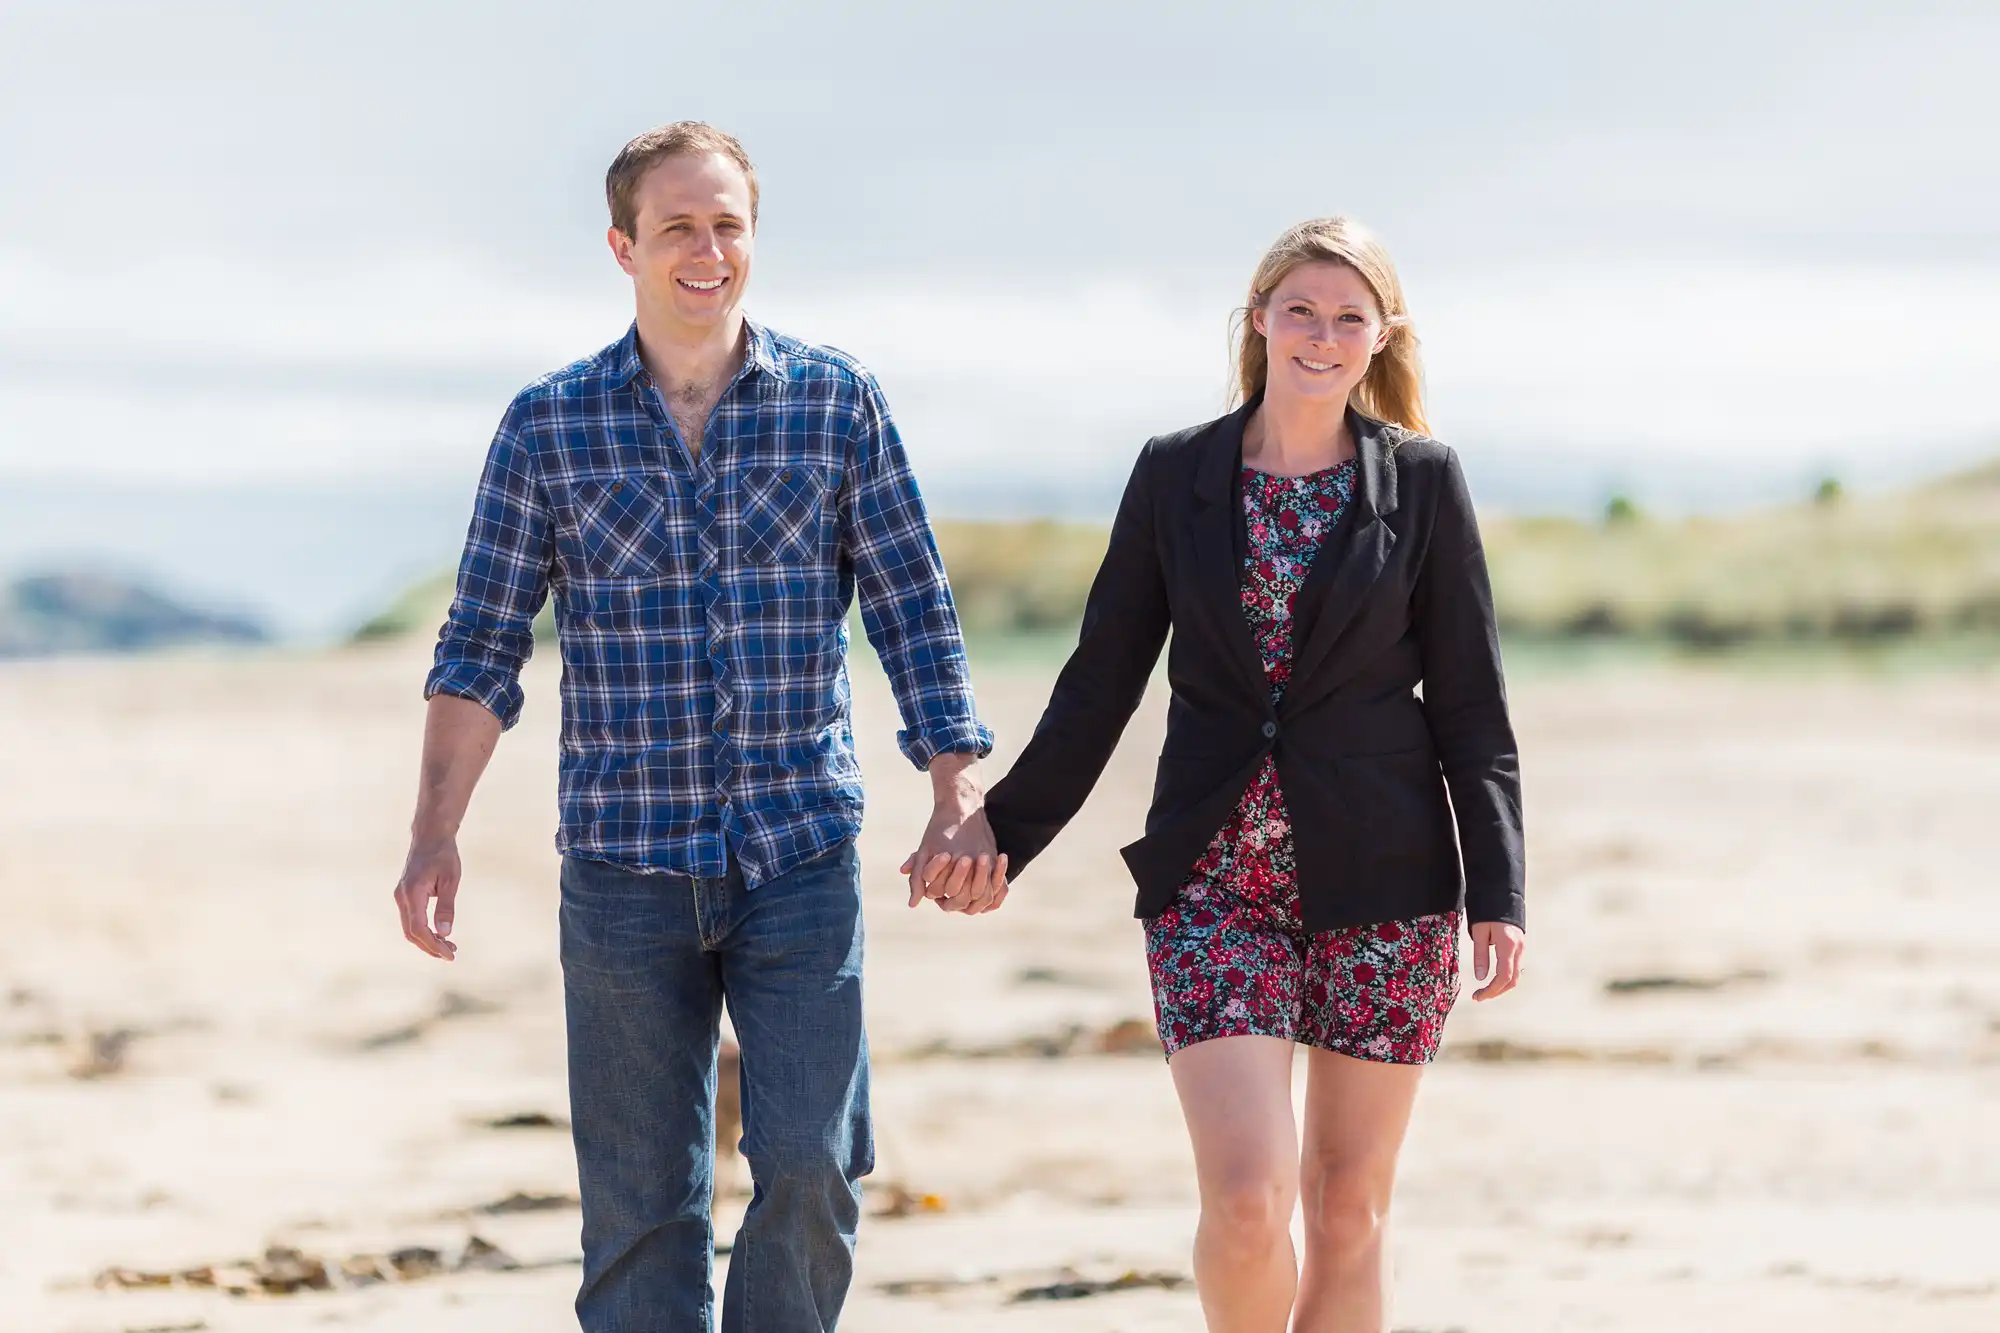 A happy couple holding hands and walking on a sandy beach, both smiling and dressed in casual outfits.